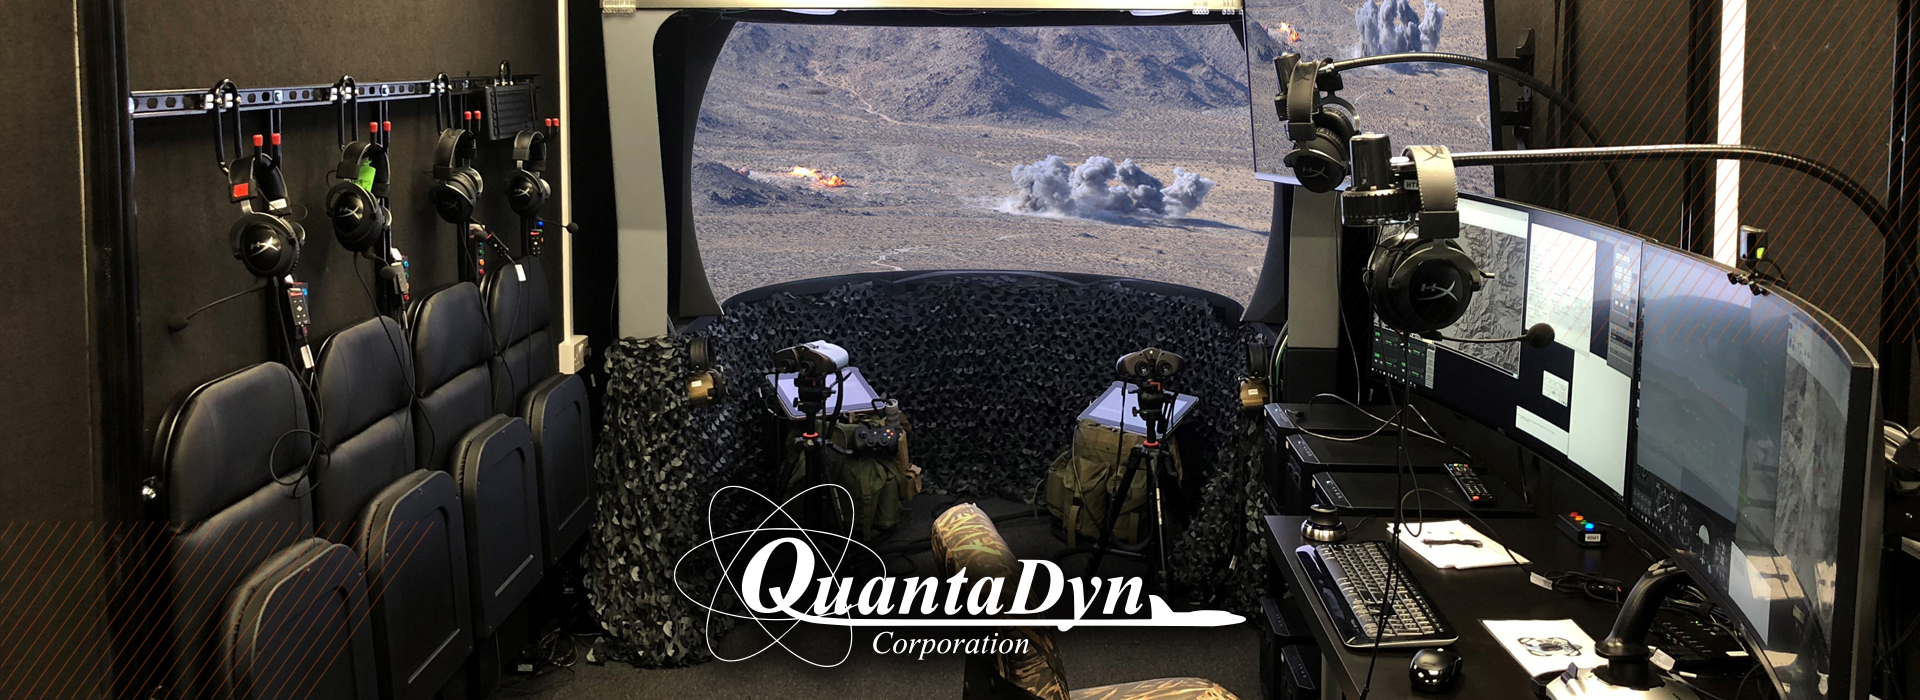 quantadyn_to_upgrade_uk_mobile_jtac_training_system_with_vbs_blue_ig